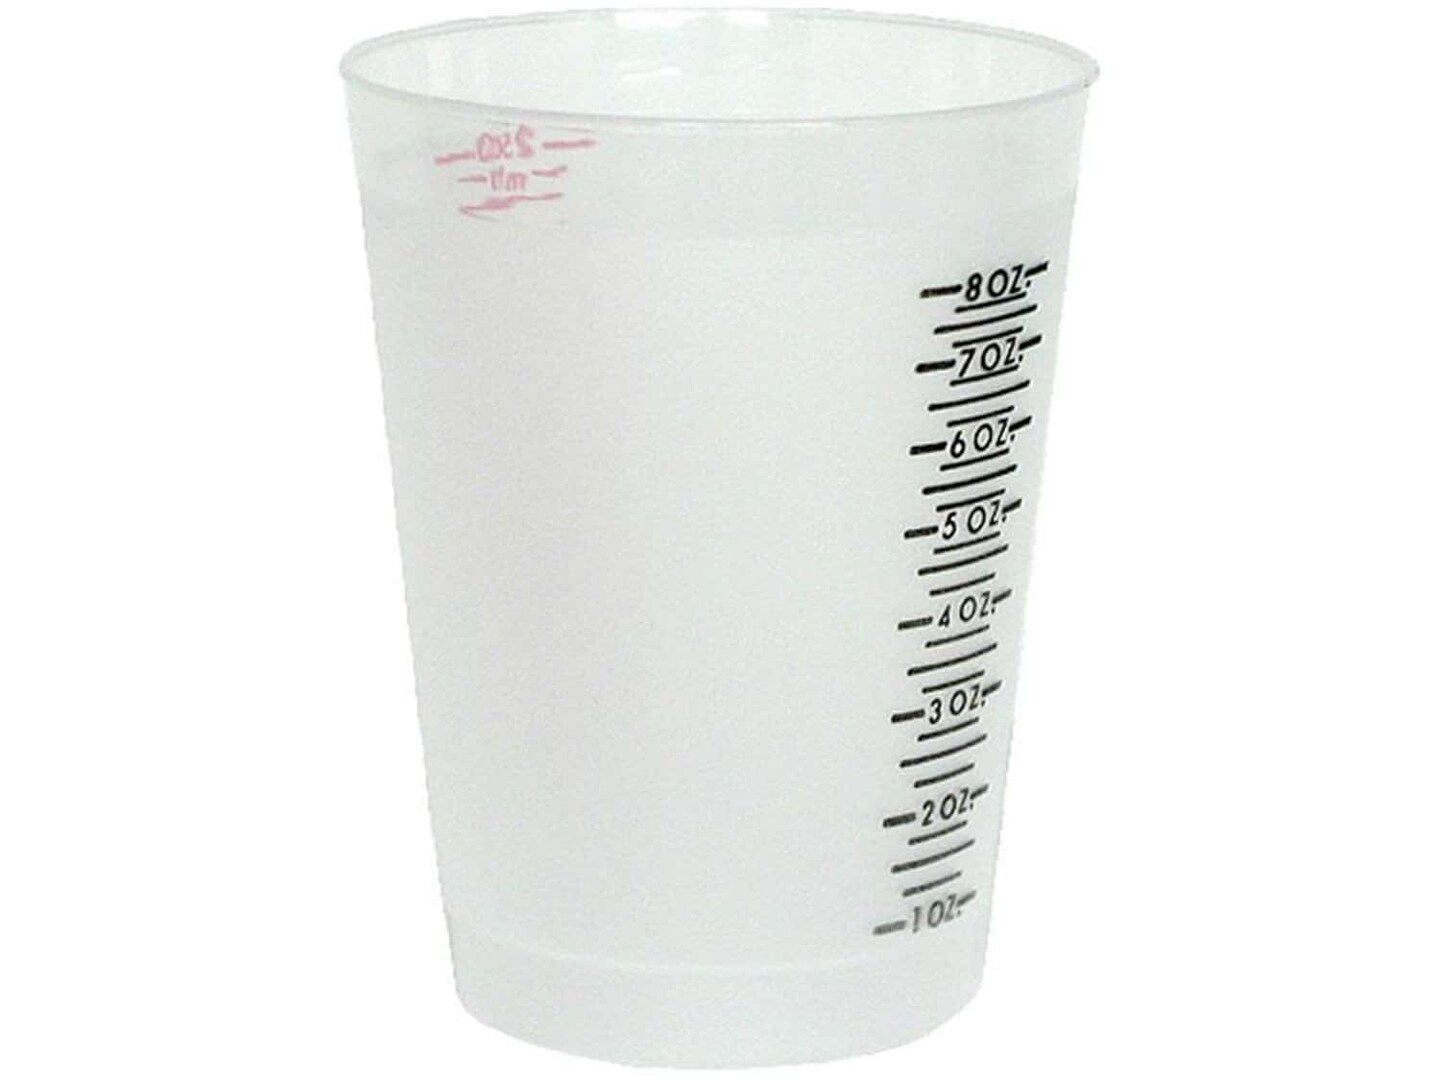 Resin Casting Mixing Cups - 10oz